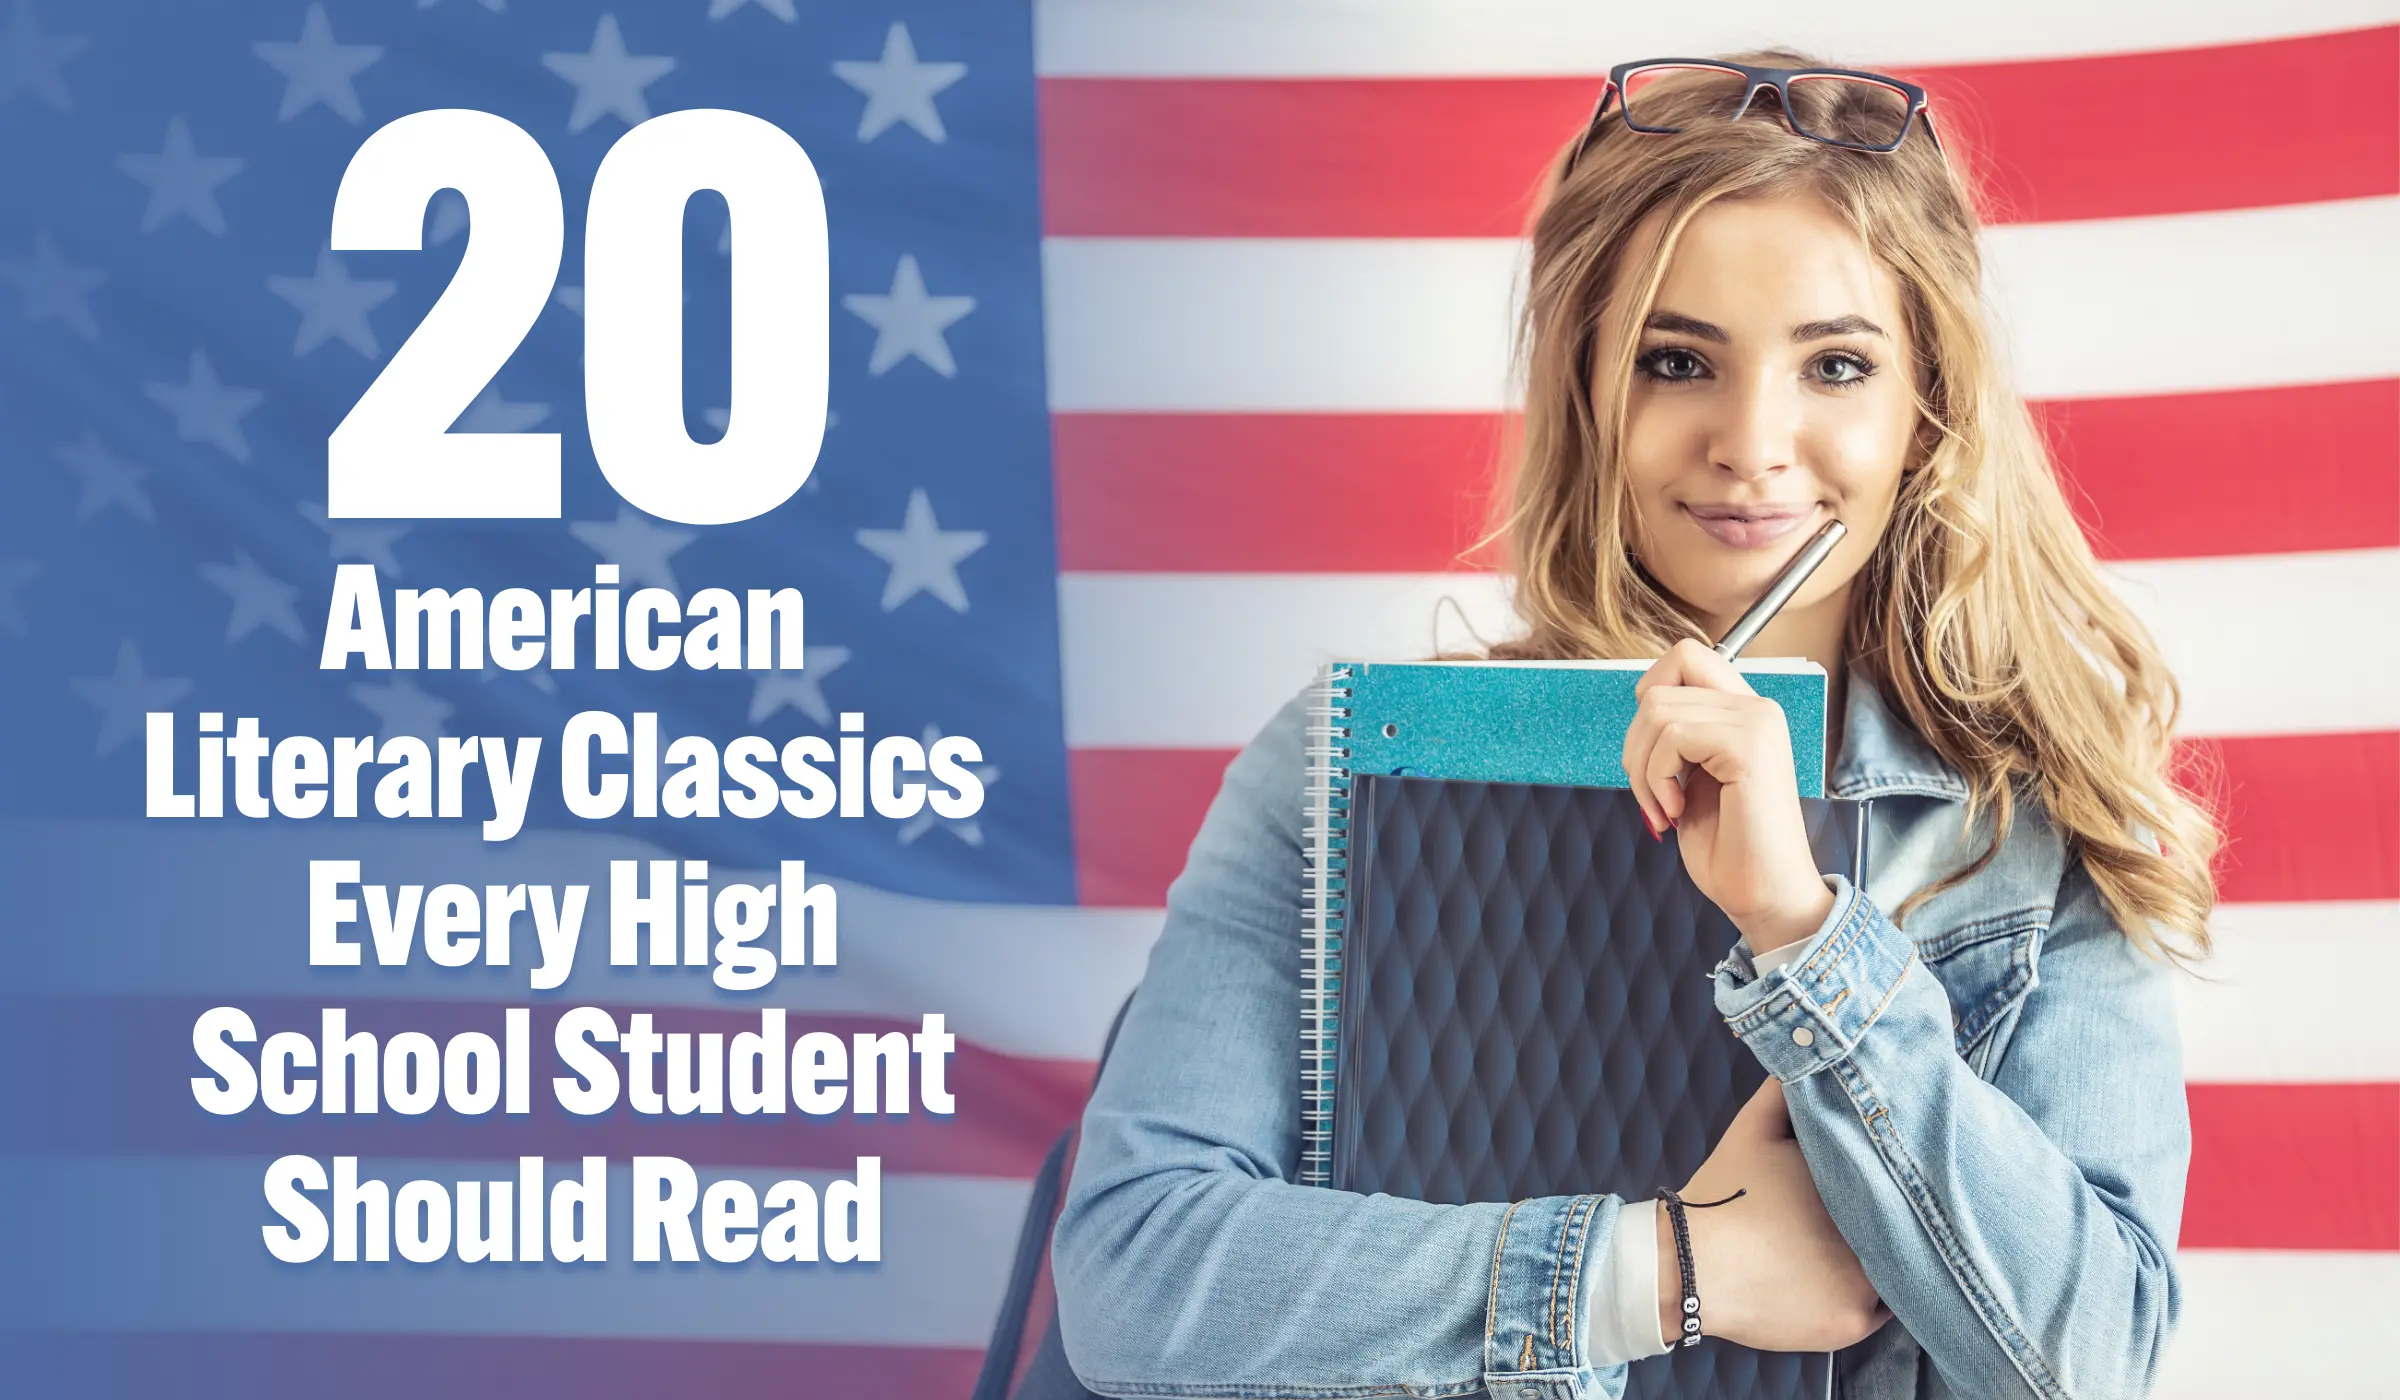 20 American Literary Classics Every High School Student Should Read